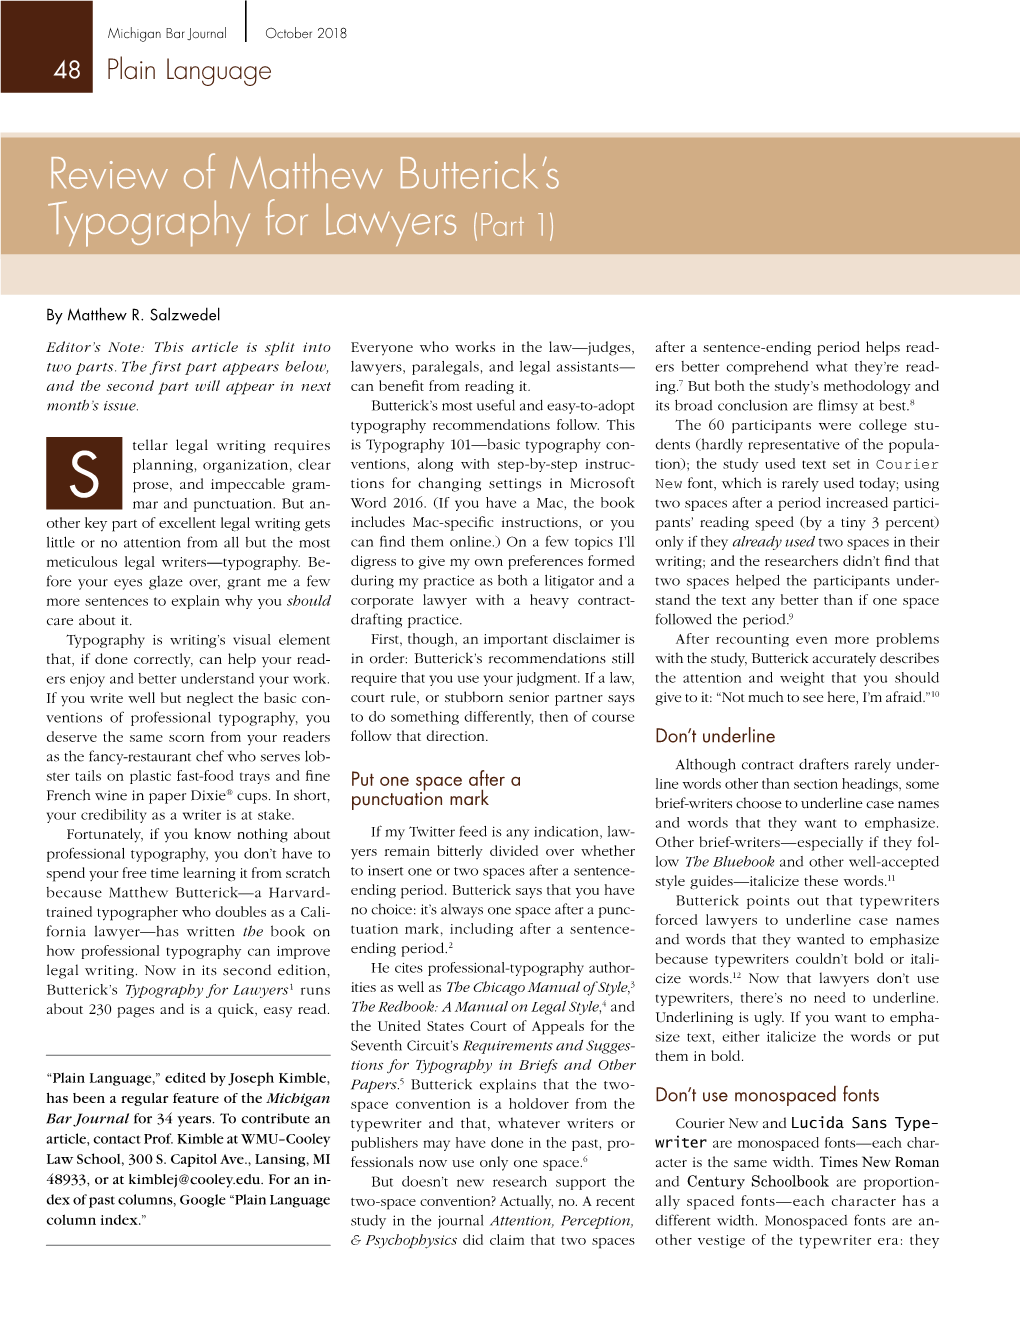 Review of Matthew Butterick's Typography for Lawyers (Part 1)